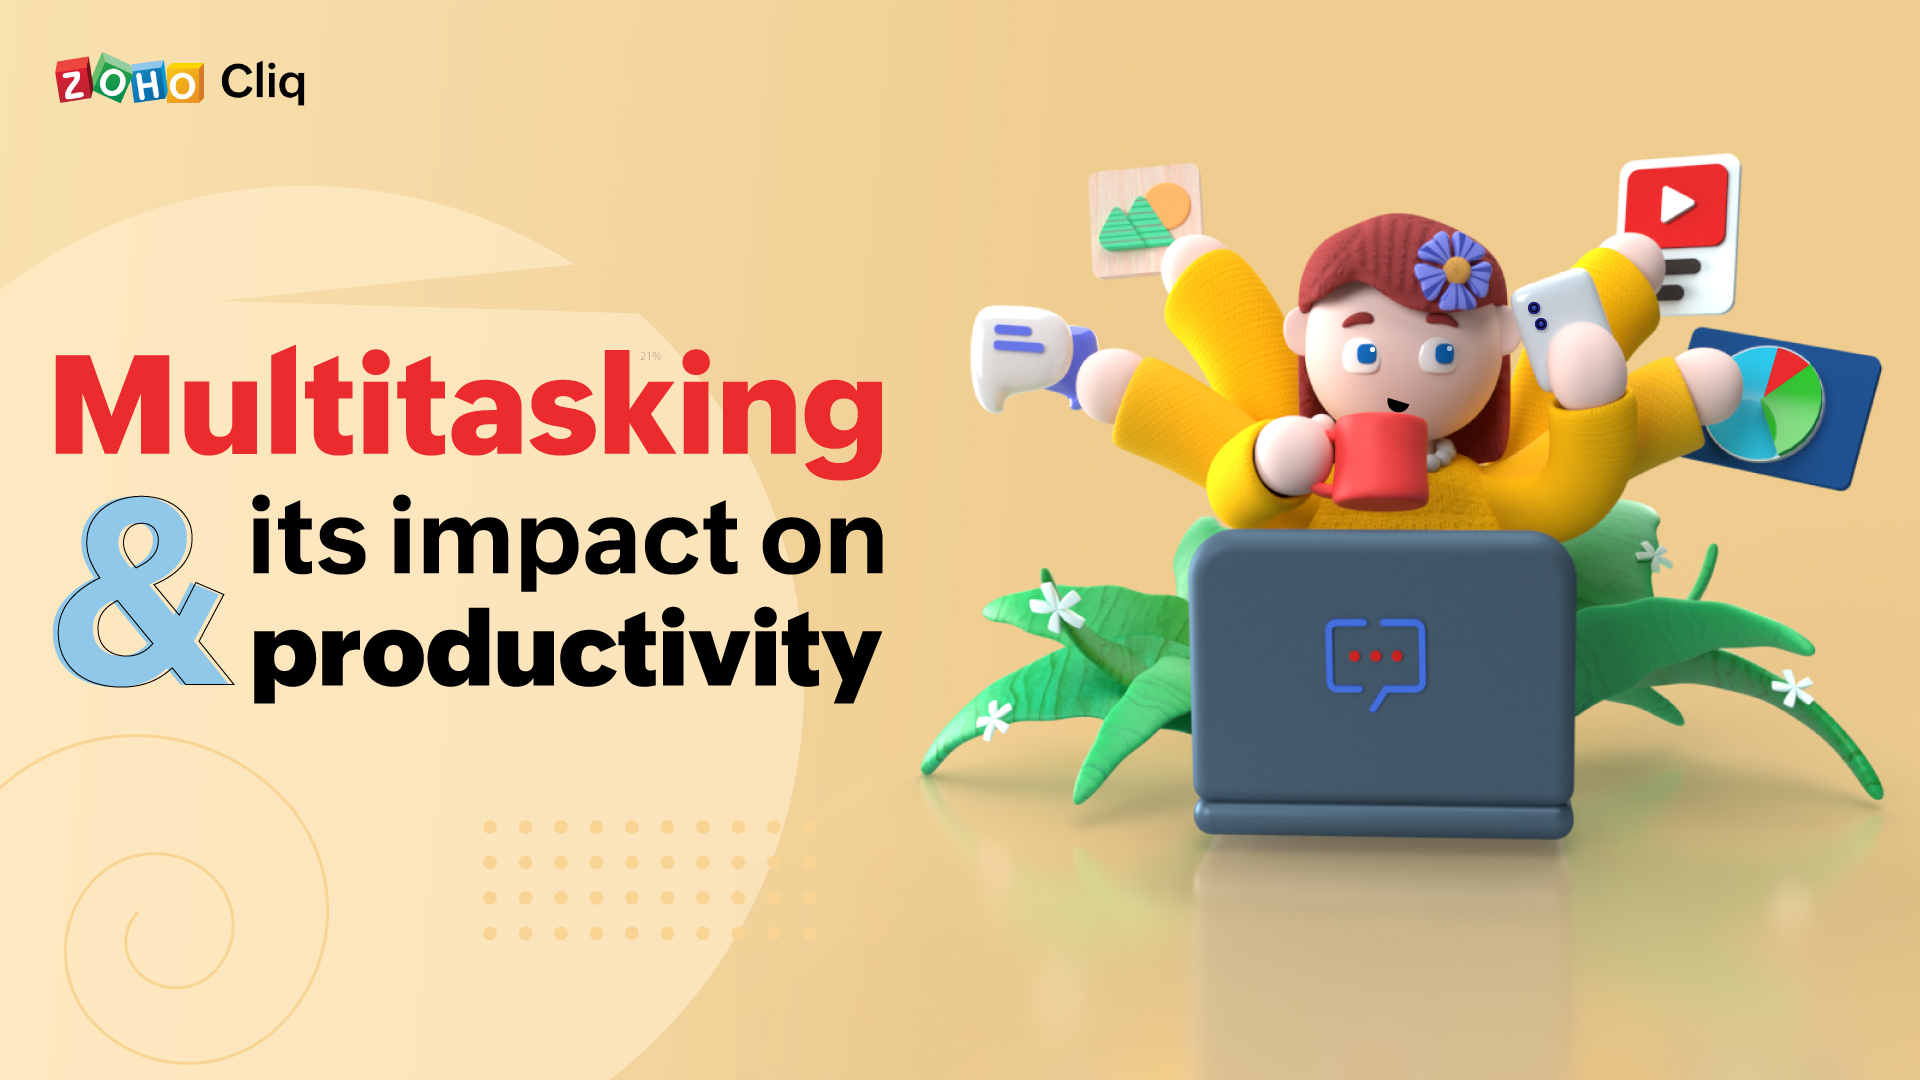 Does multitasking help increase productivity at work?